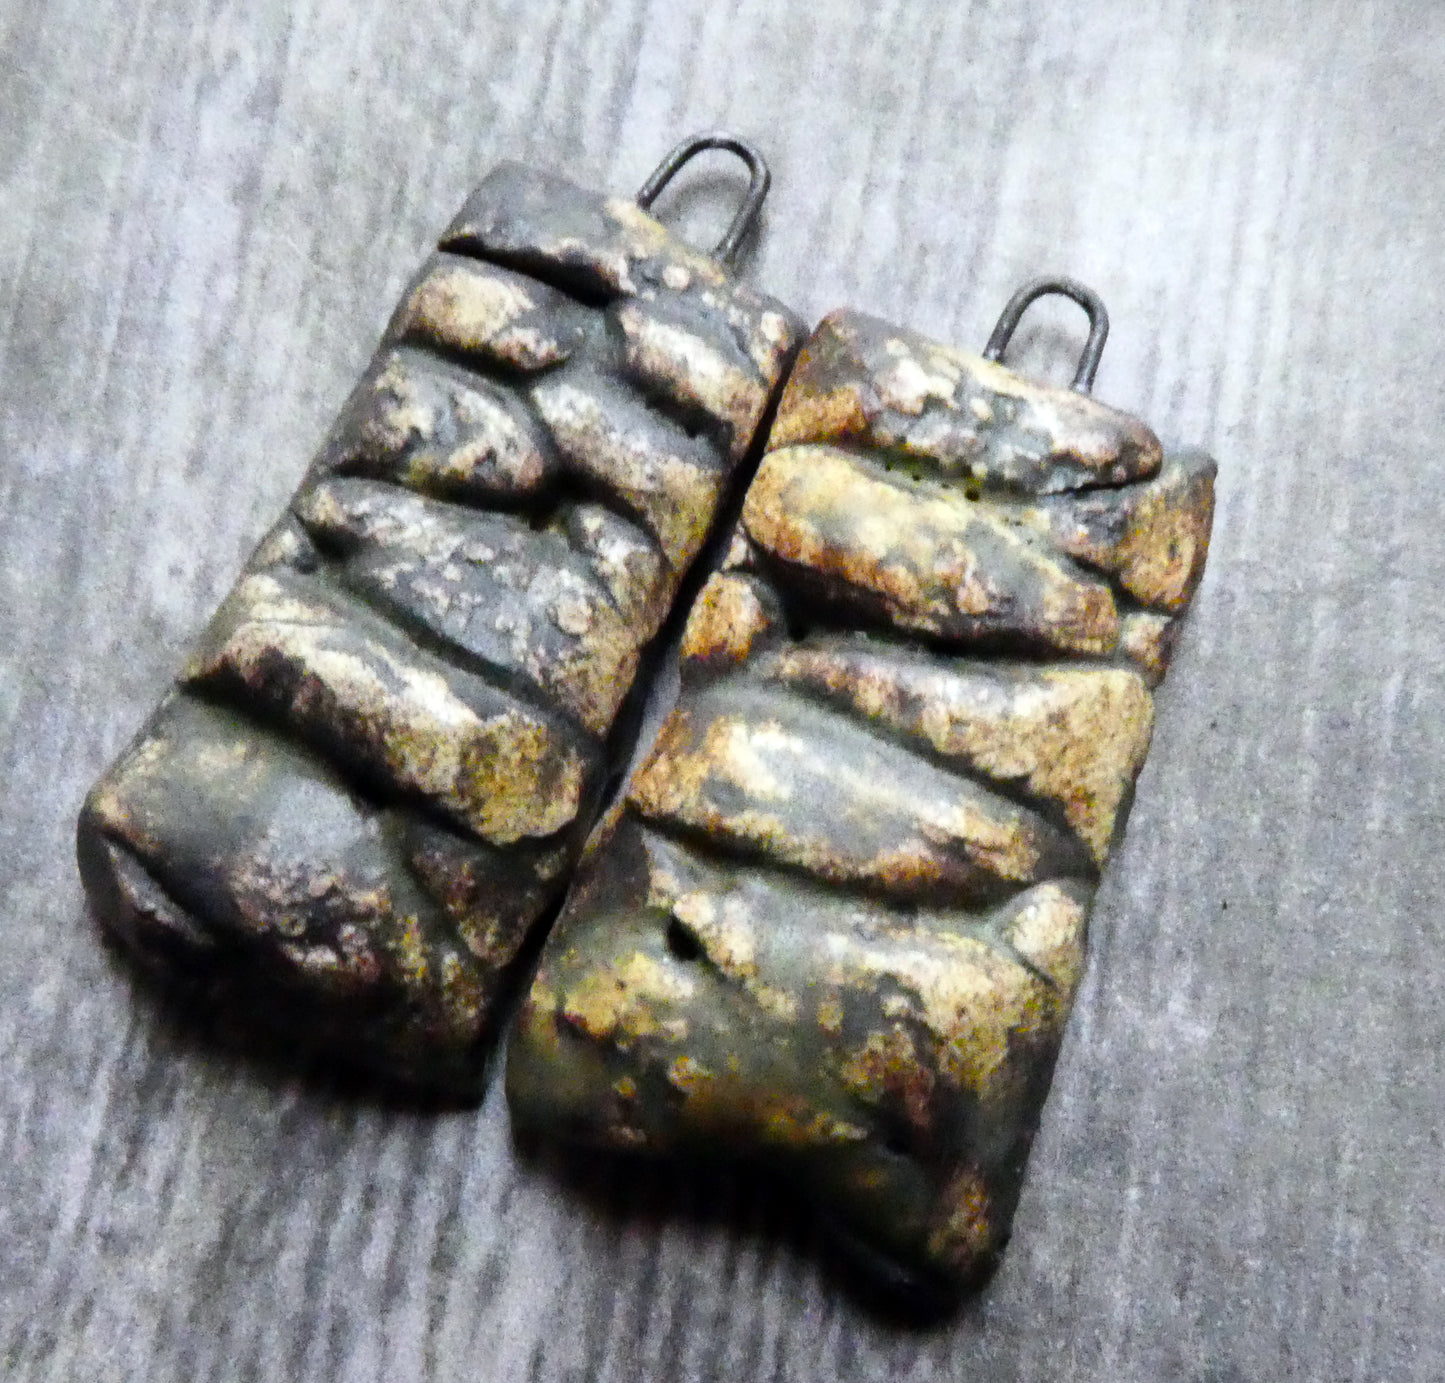 Ceramic Dry Stone Wall Earring Charms - Oxide